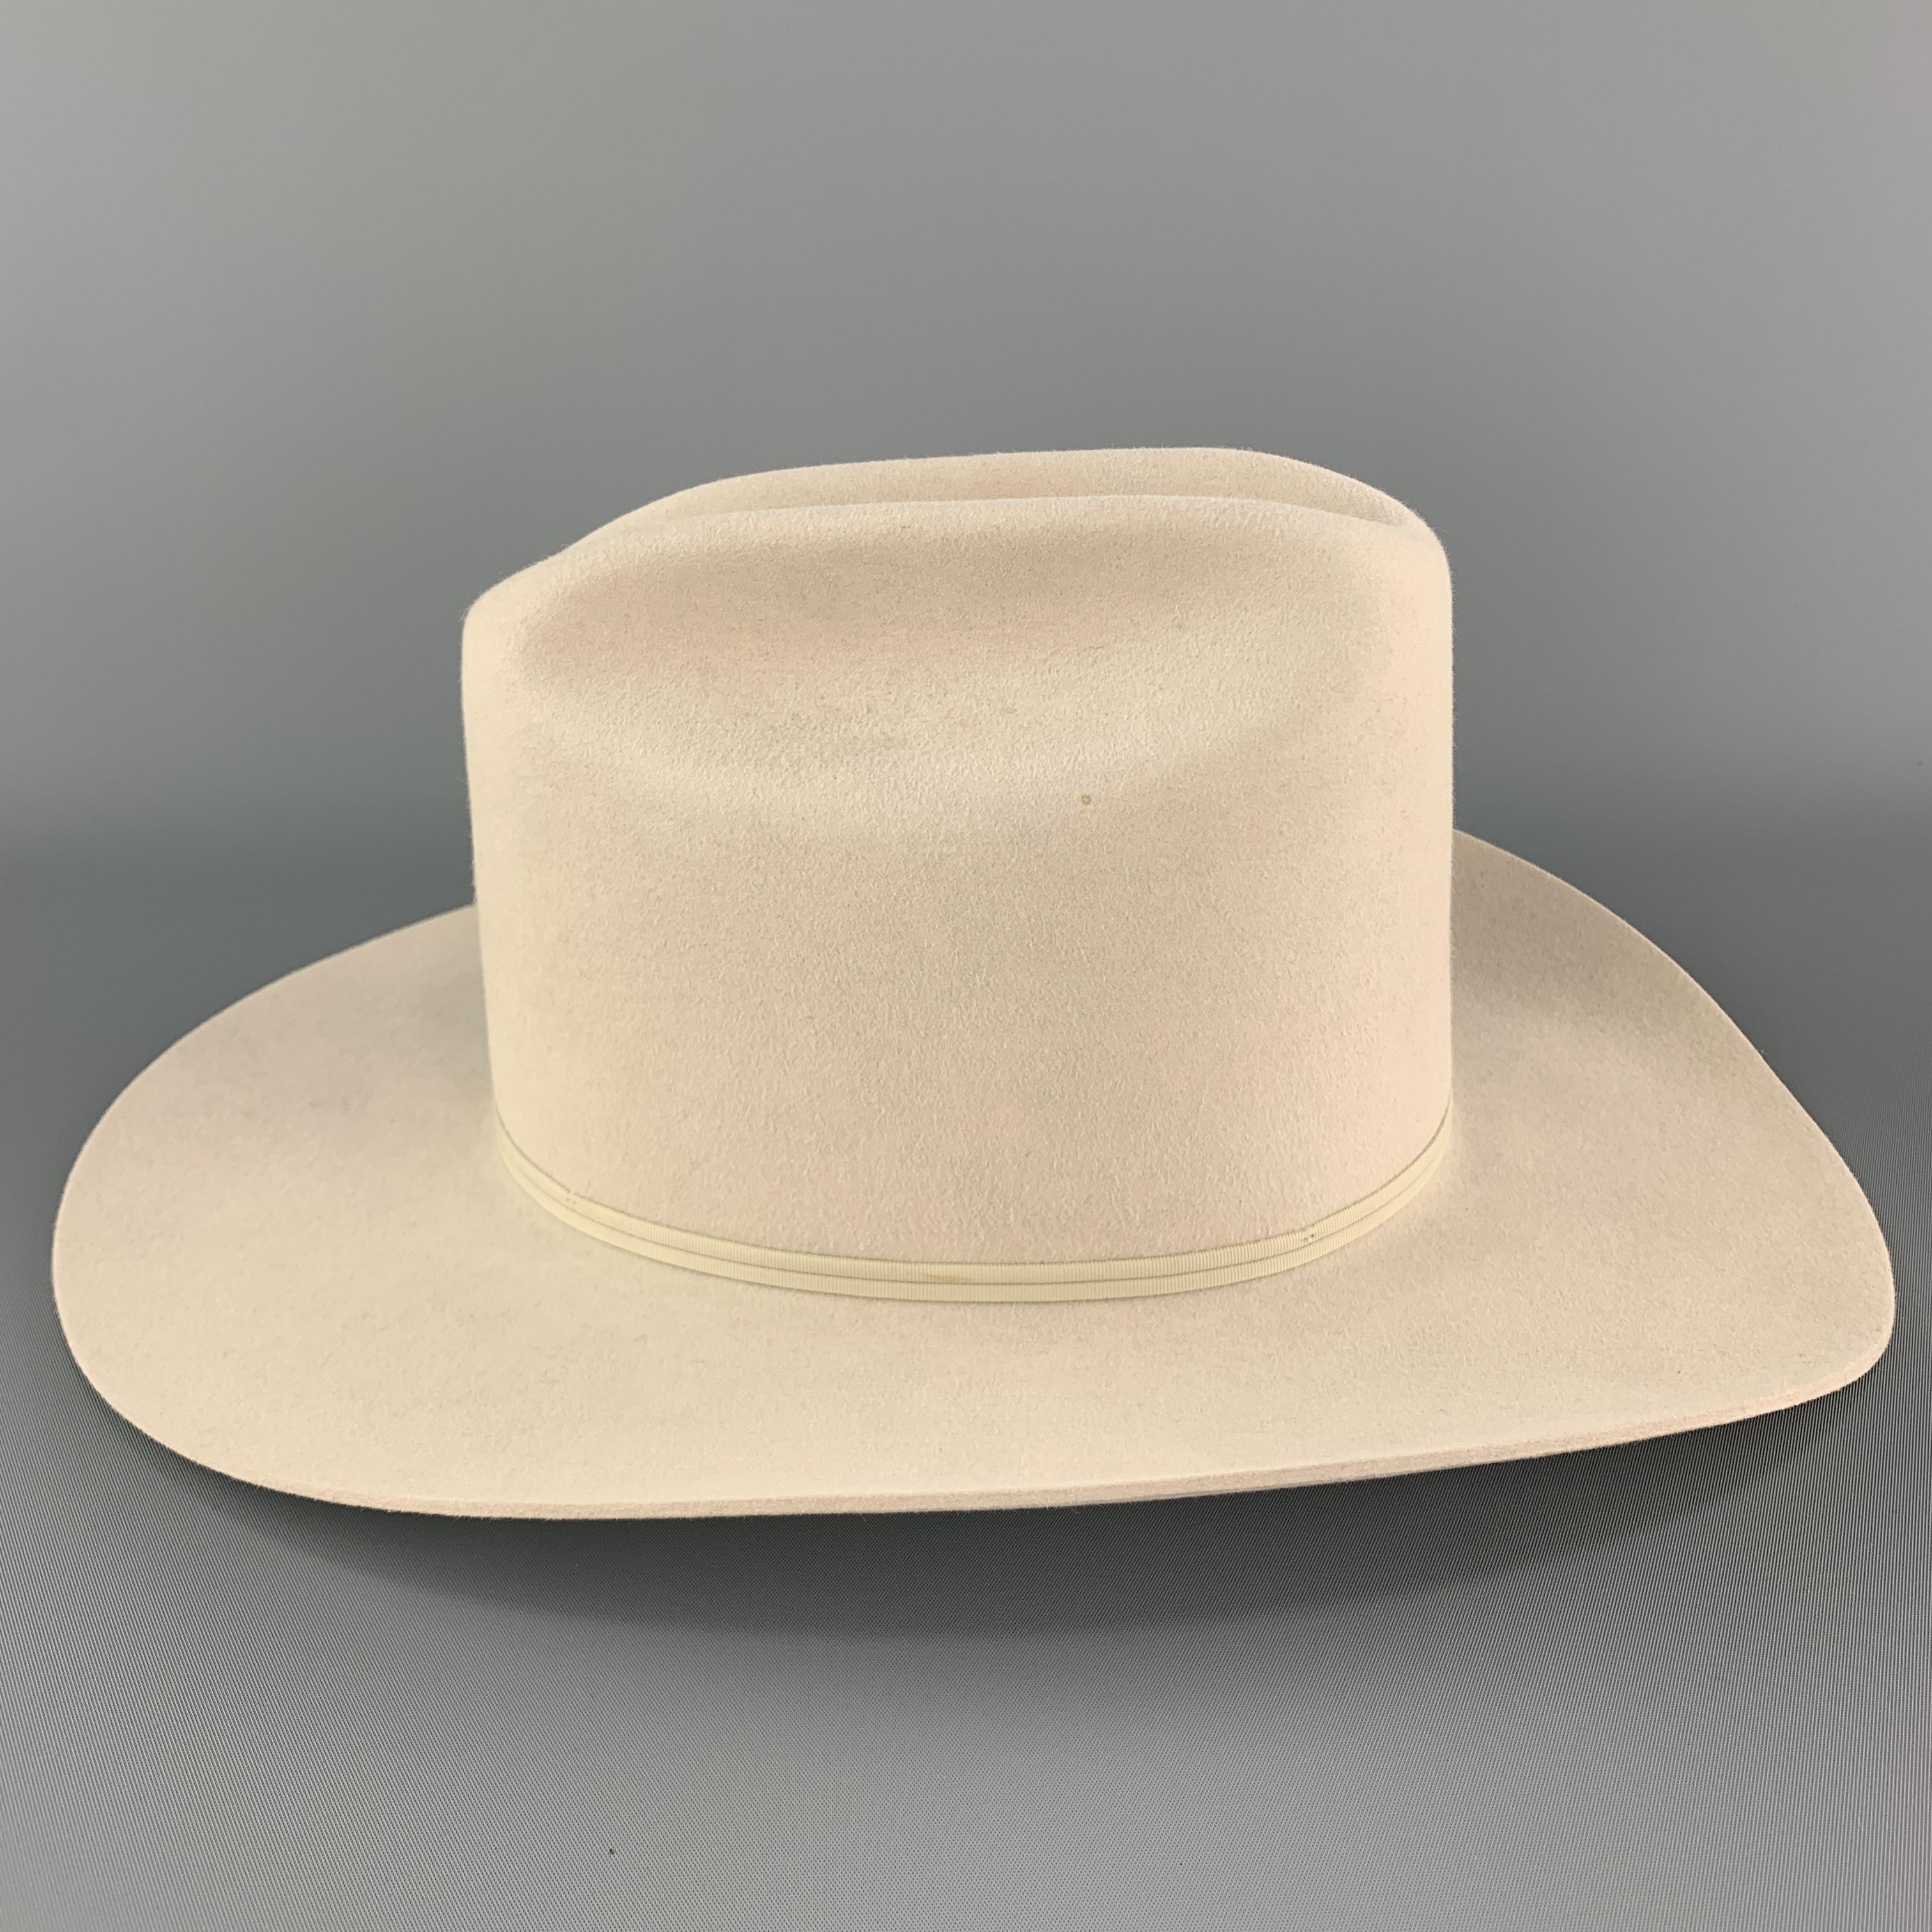 Vintage STETSON Rancher hat comes in 